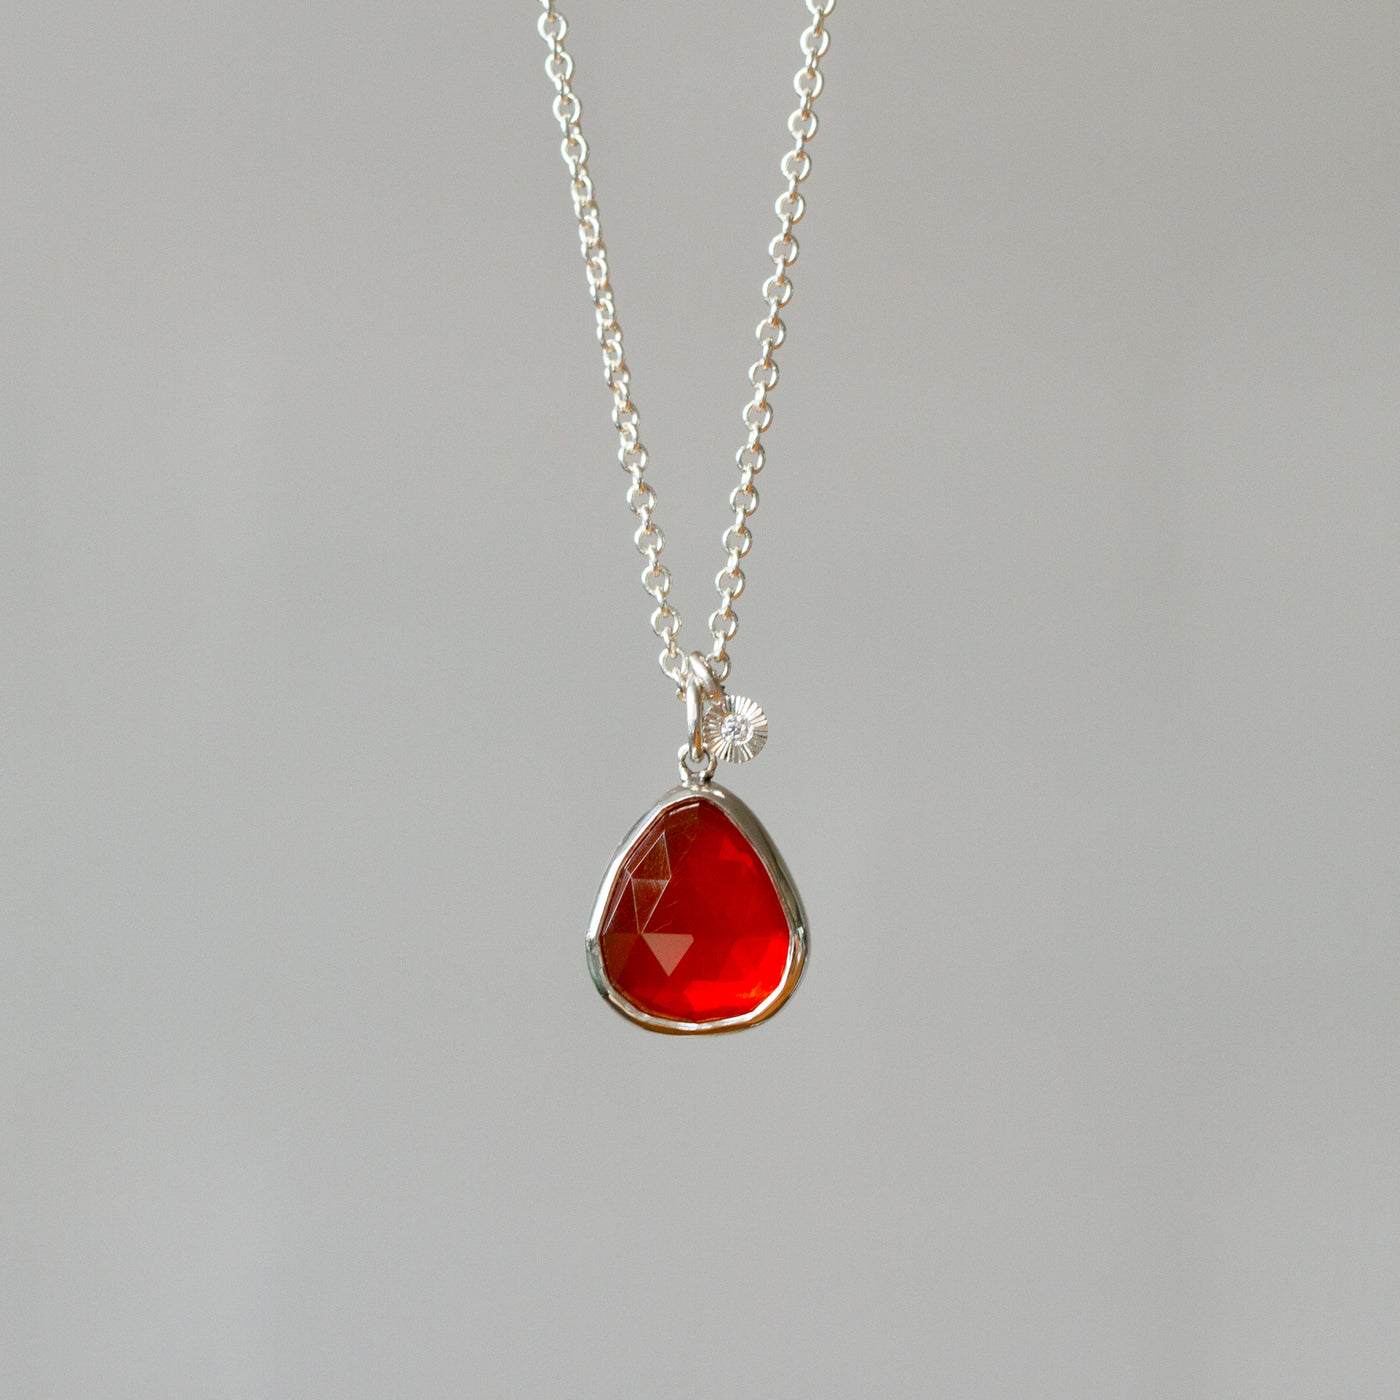 Fire Opal Theia Necklace in Sterling Silver #1